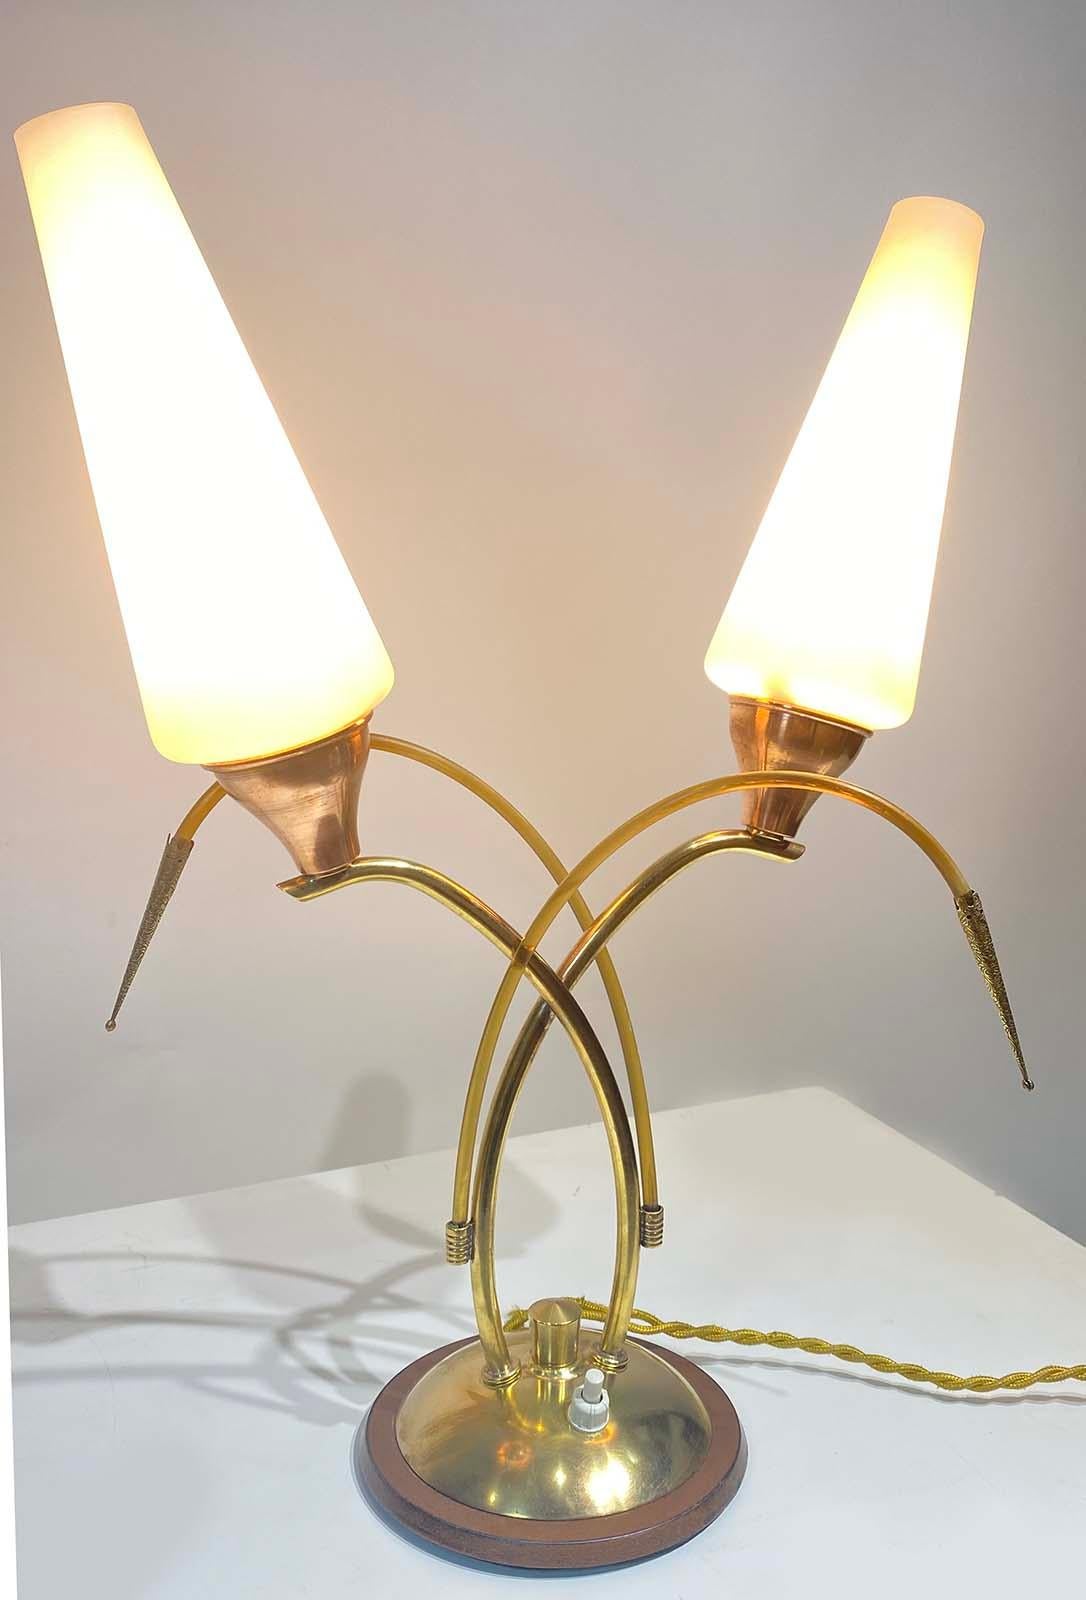 Beautiful brass table lamp with two opaline glass shades, and 2 decorative stems, circa 1950.
 